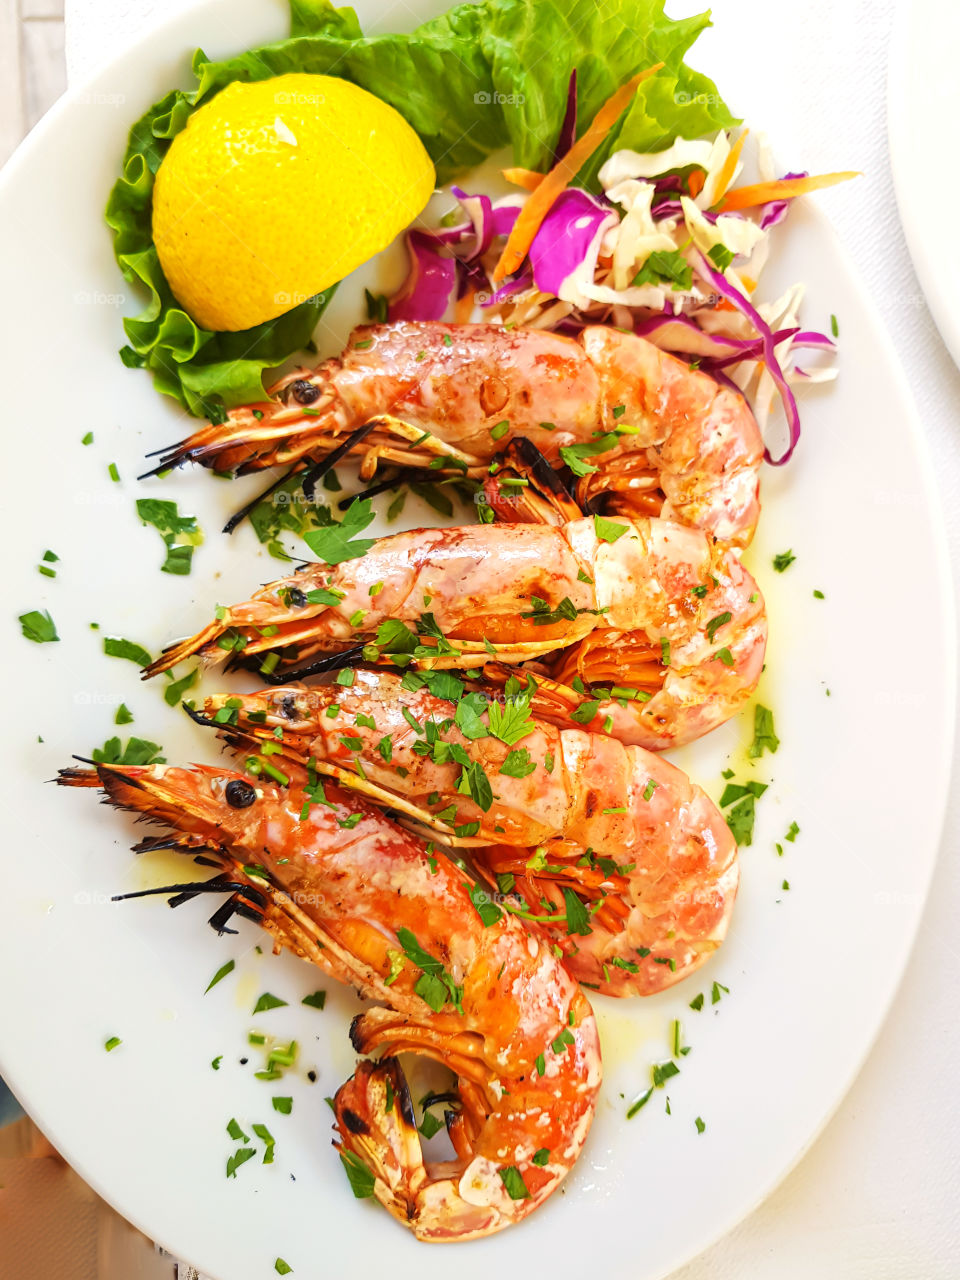 Top view to grilled shrimps sprinkled with chopped herbs next to a slice of lemon and green salad leaves on the plate.